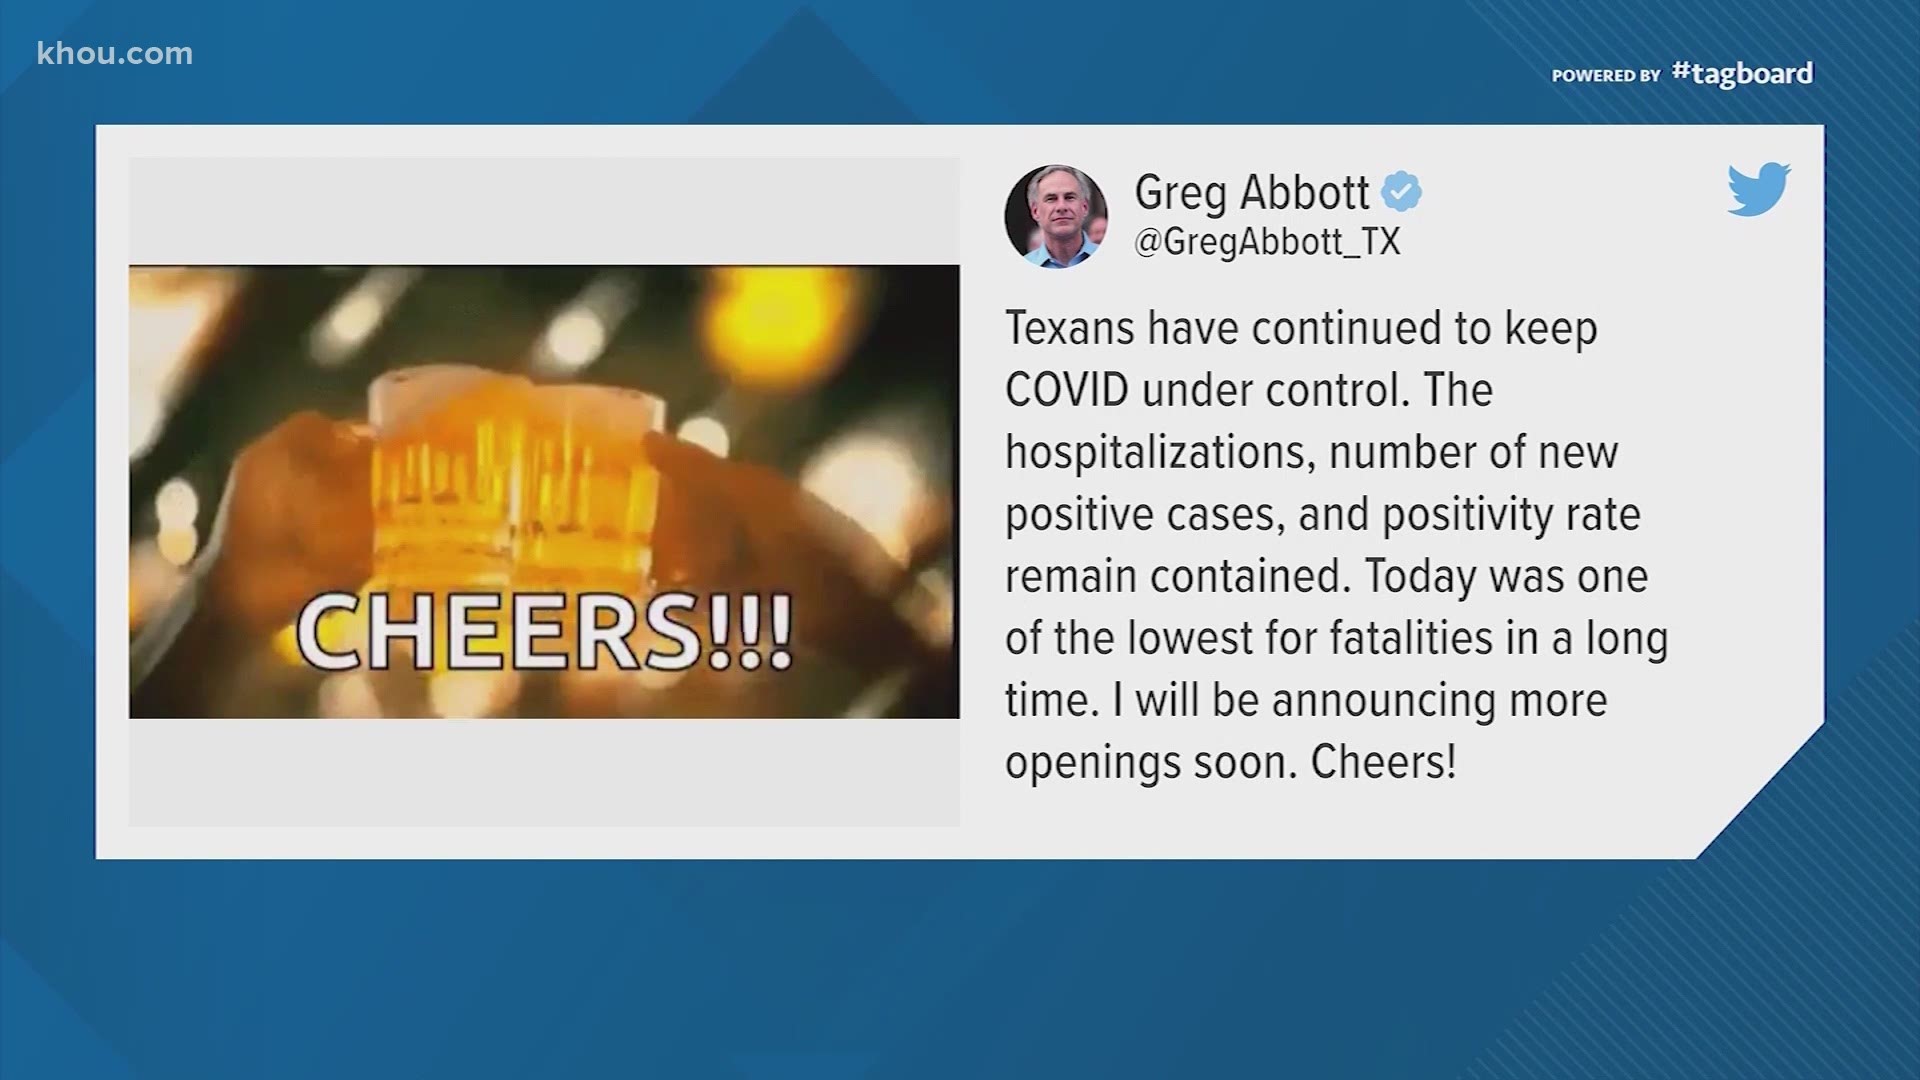 On Monday, Abbott said he’ll announce more openings soon and posted a photo of two beer glasses.